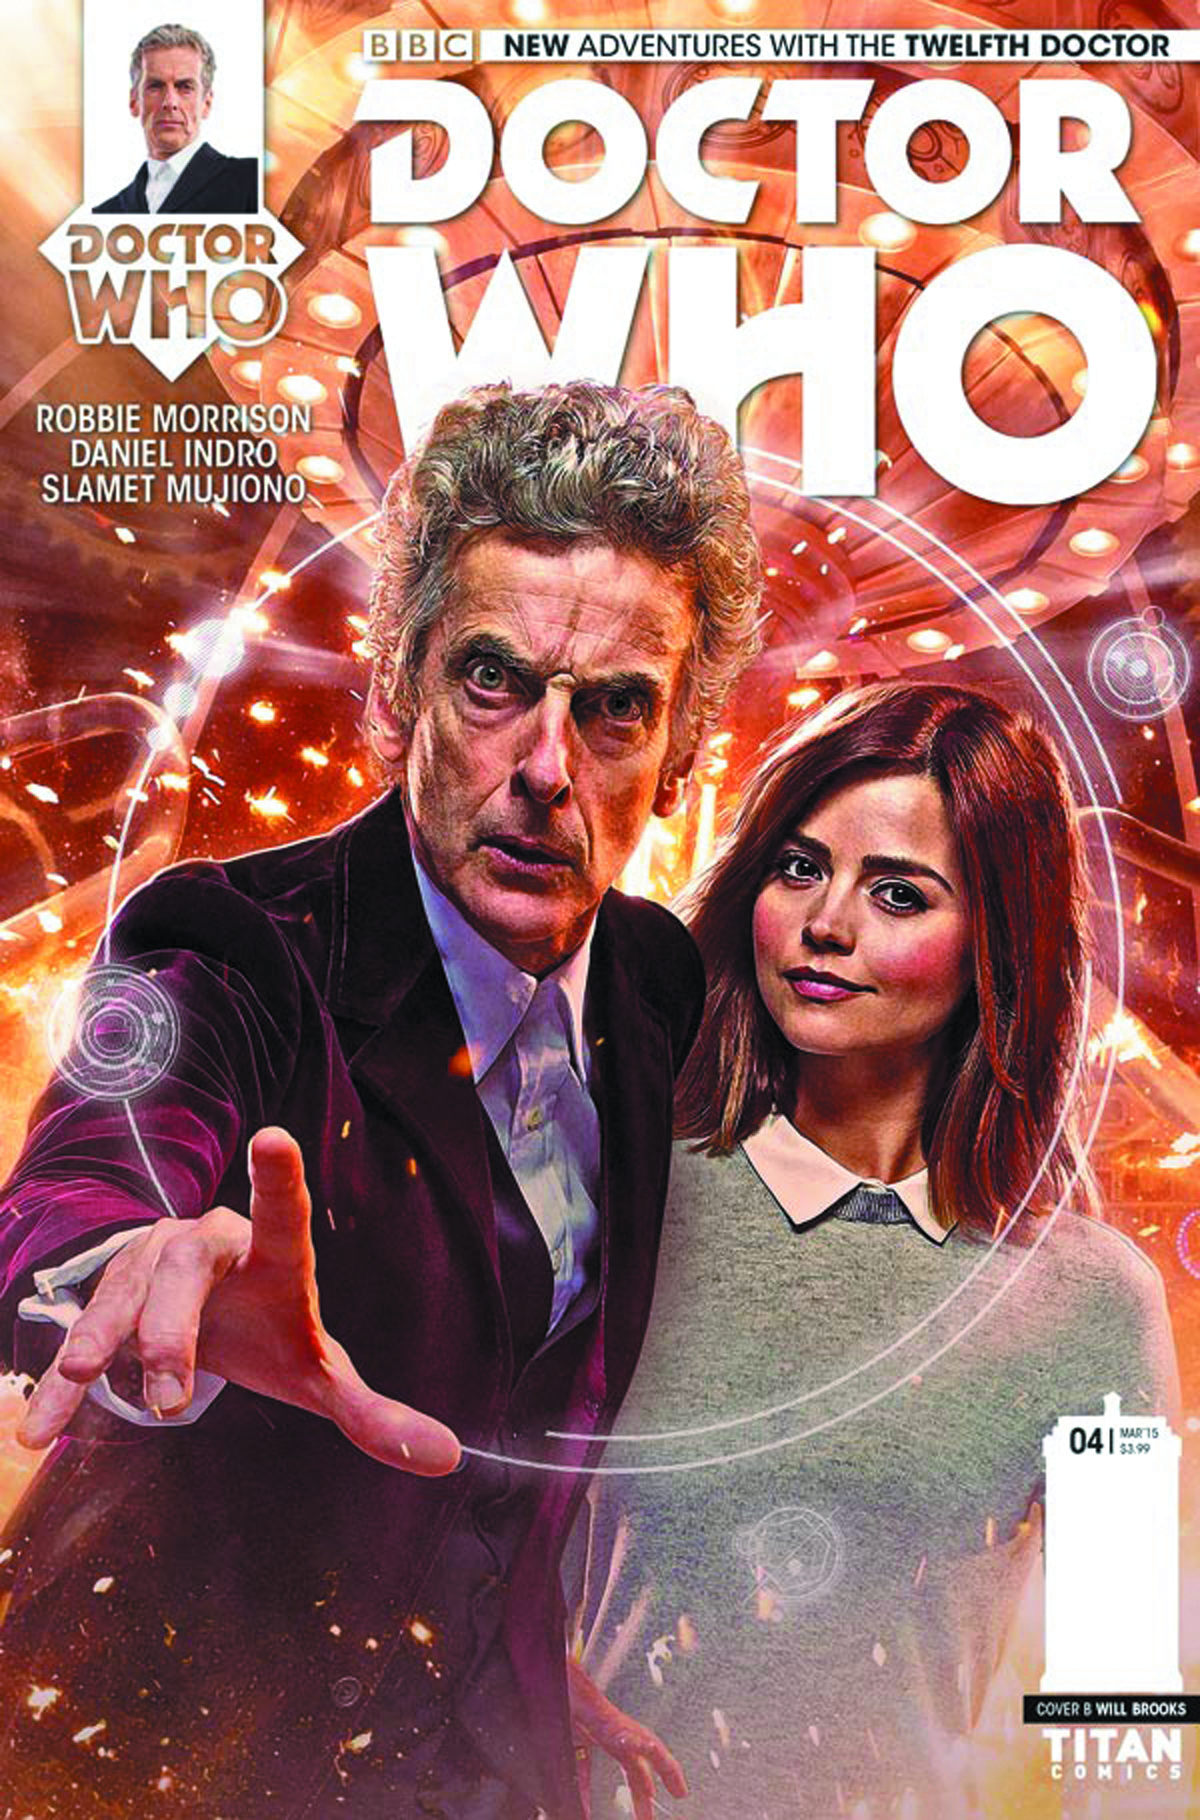 DOCTOR WHO 12TH YEAR TWO #4 CVR B PHOTO